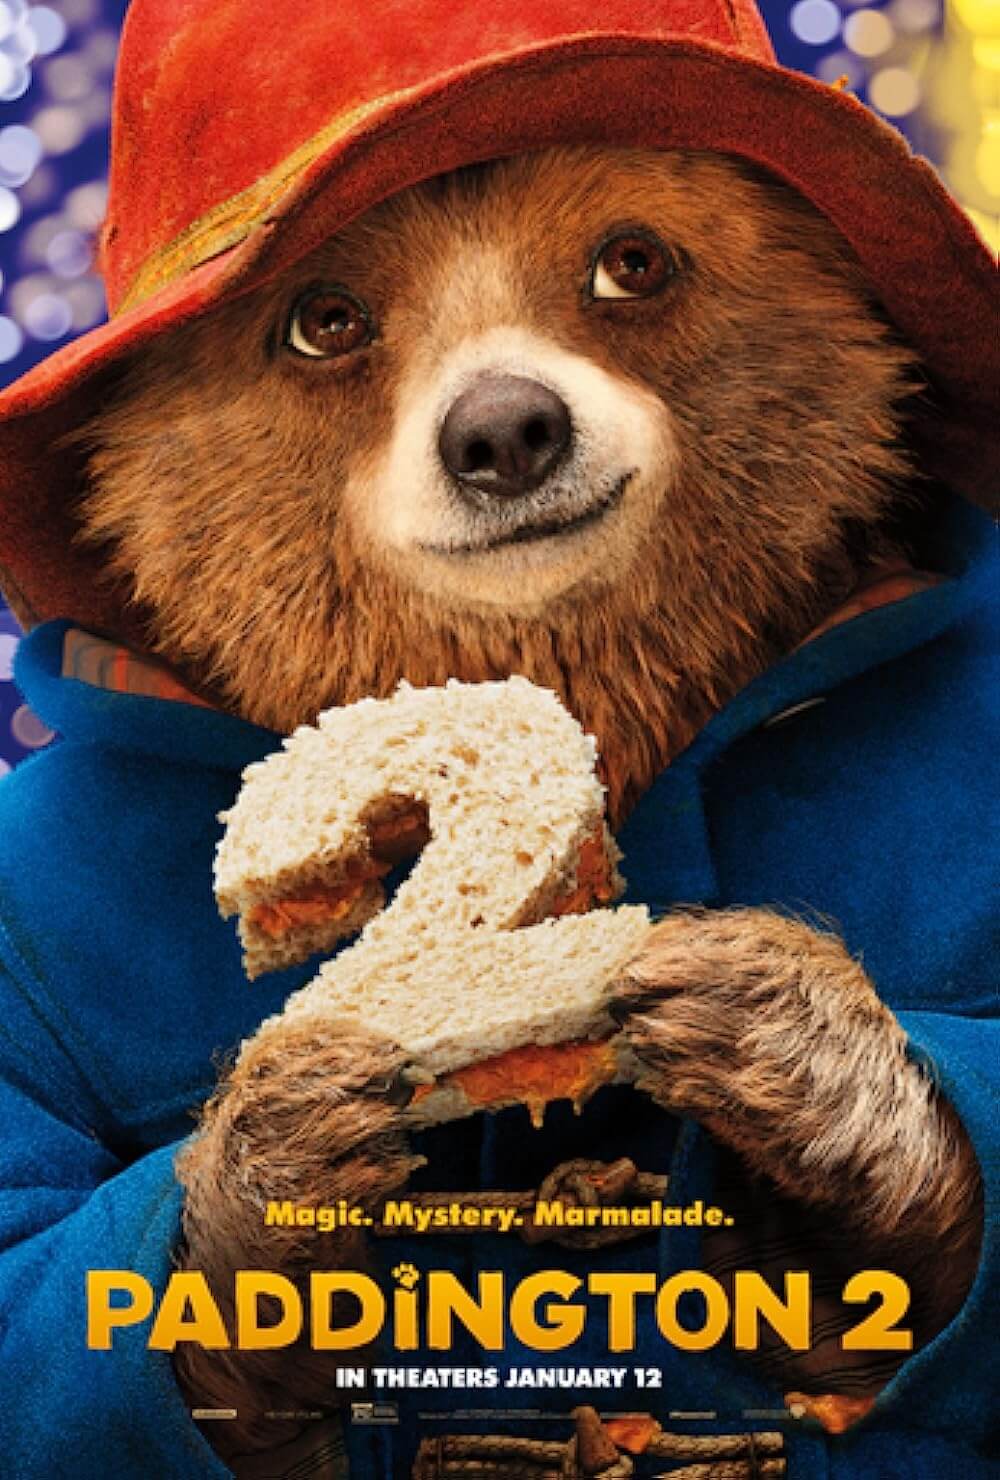 Watch Paddington 2, one of good movies for 6 year olds on Netflix.